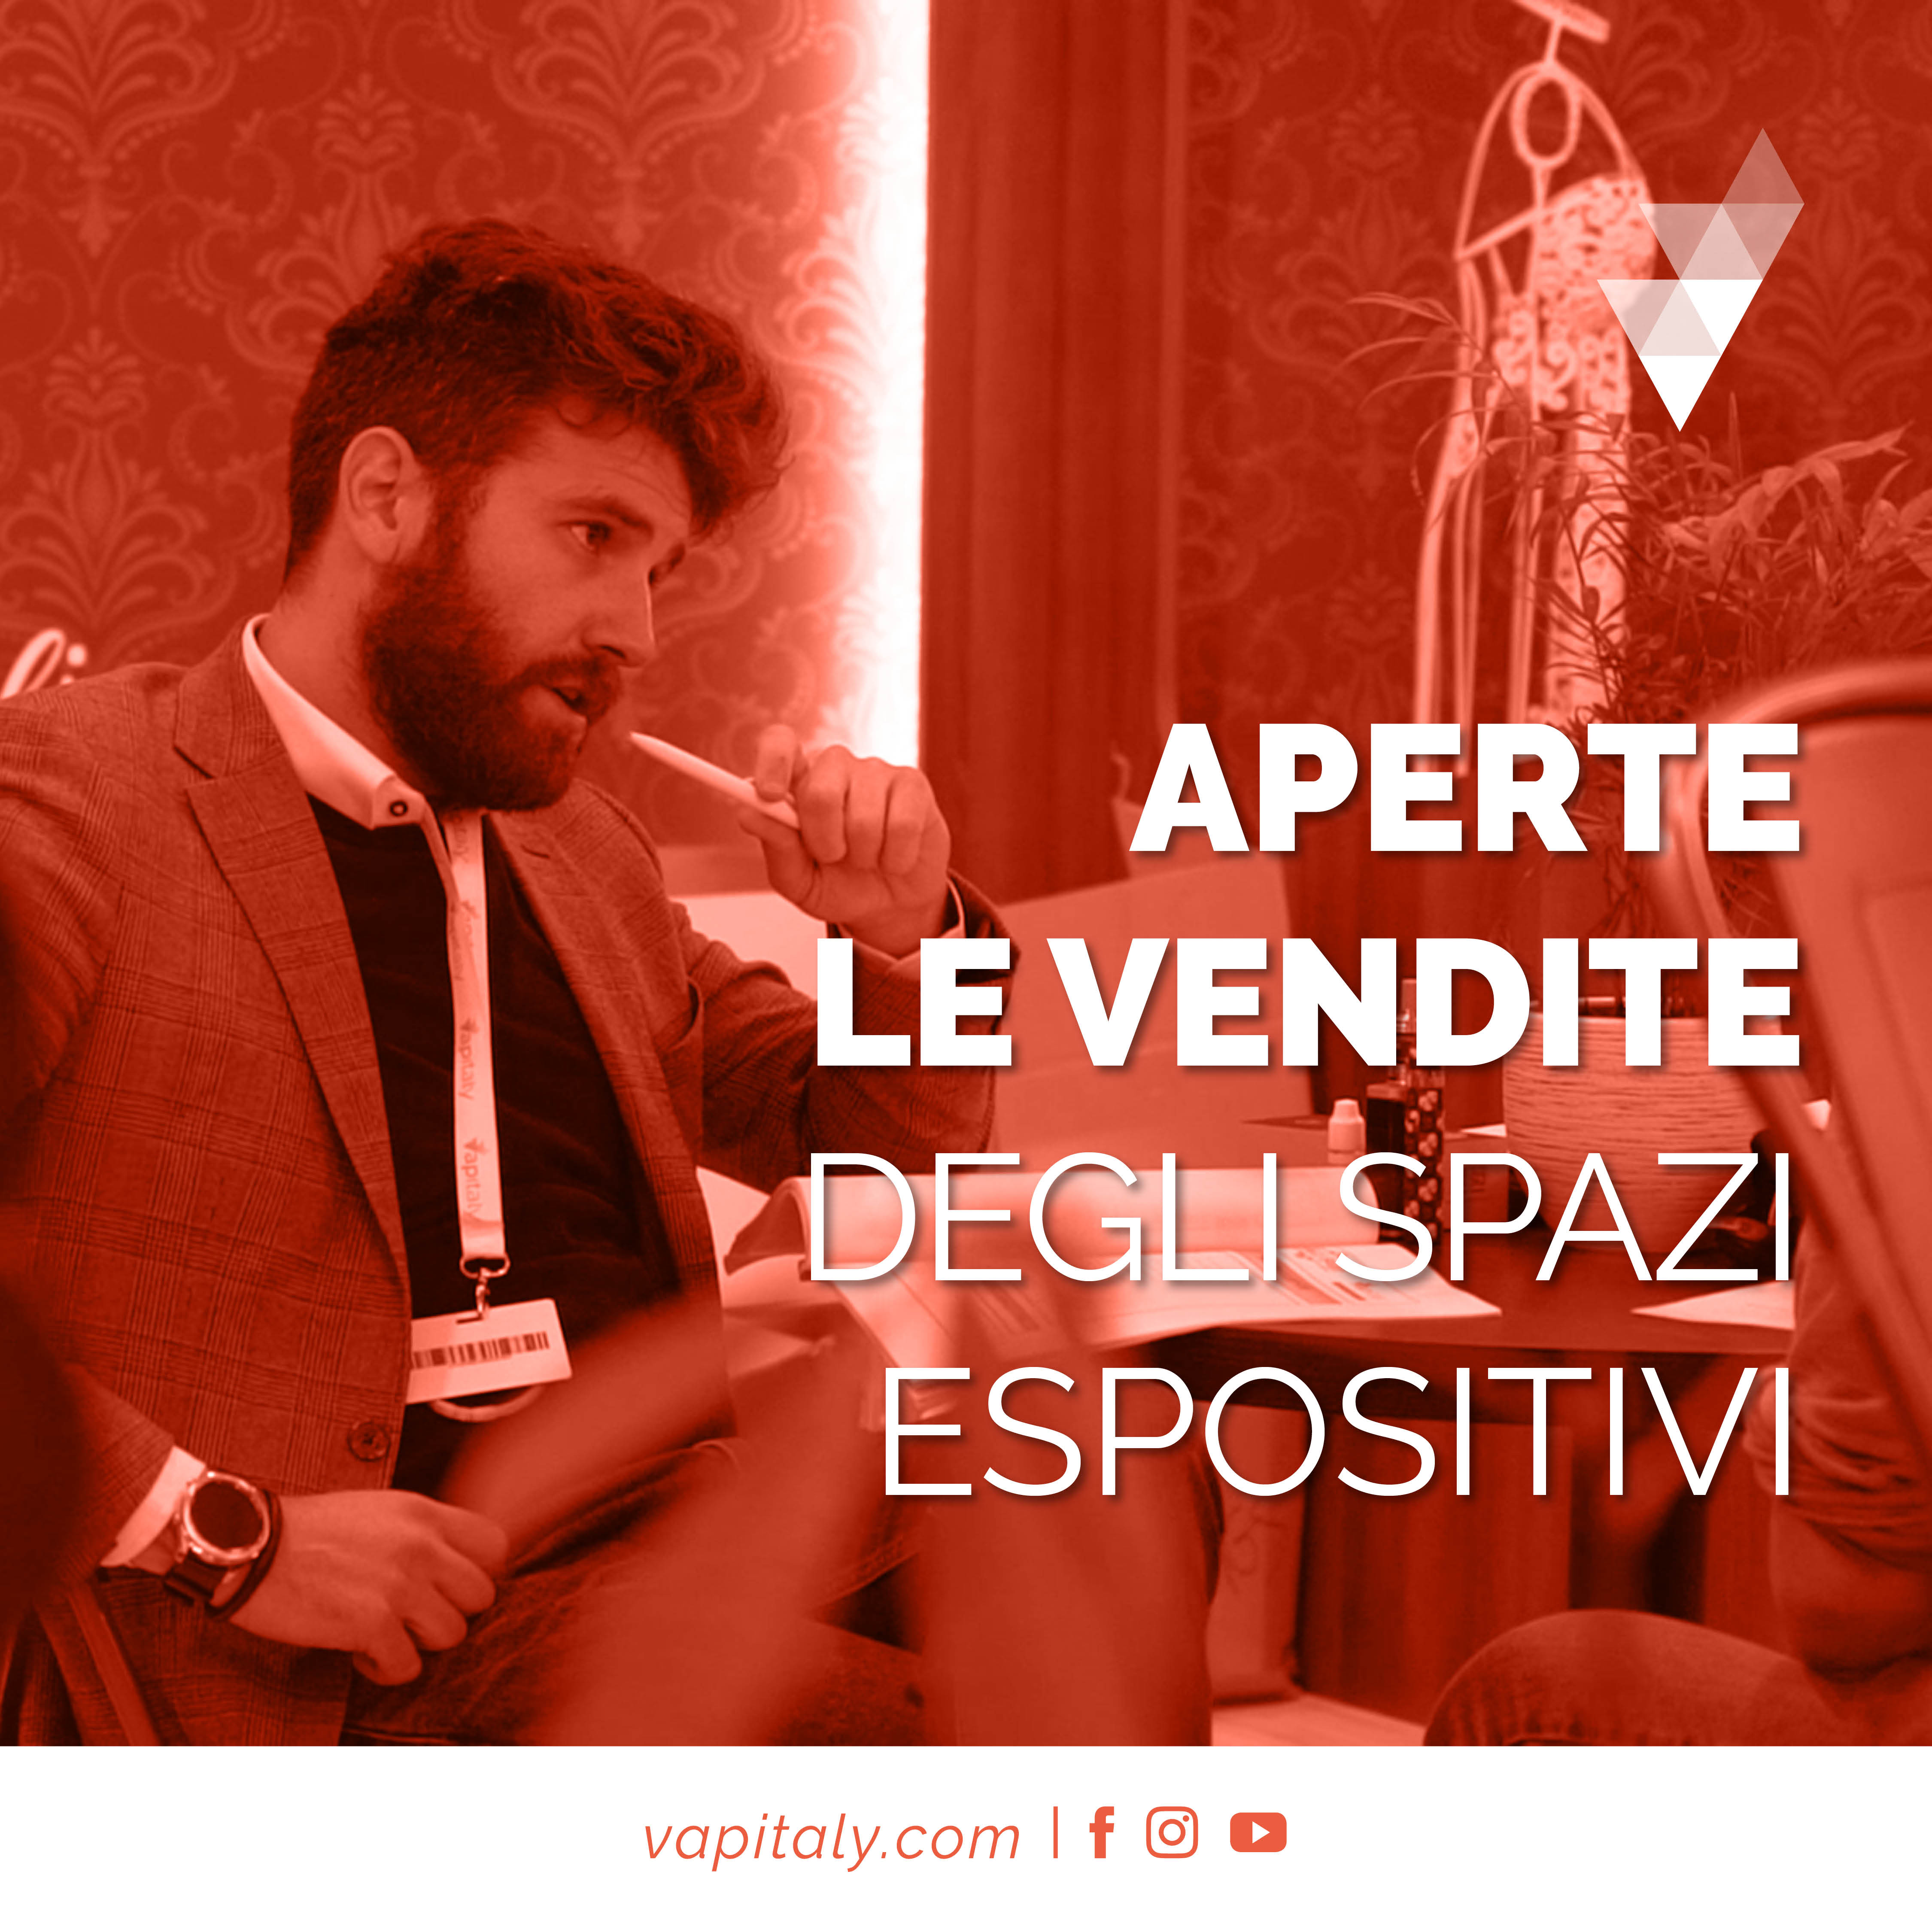 Vapitaly 2021, exhibition spaces may now be purchased